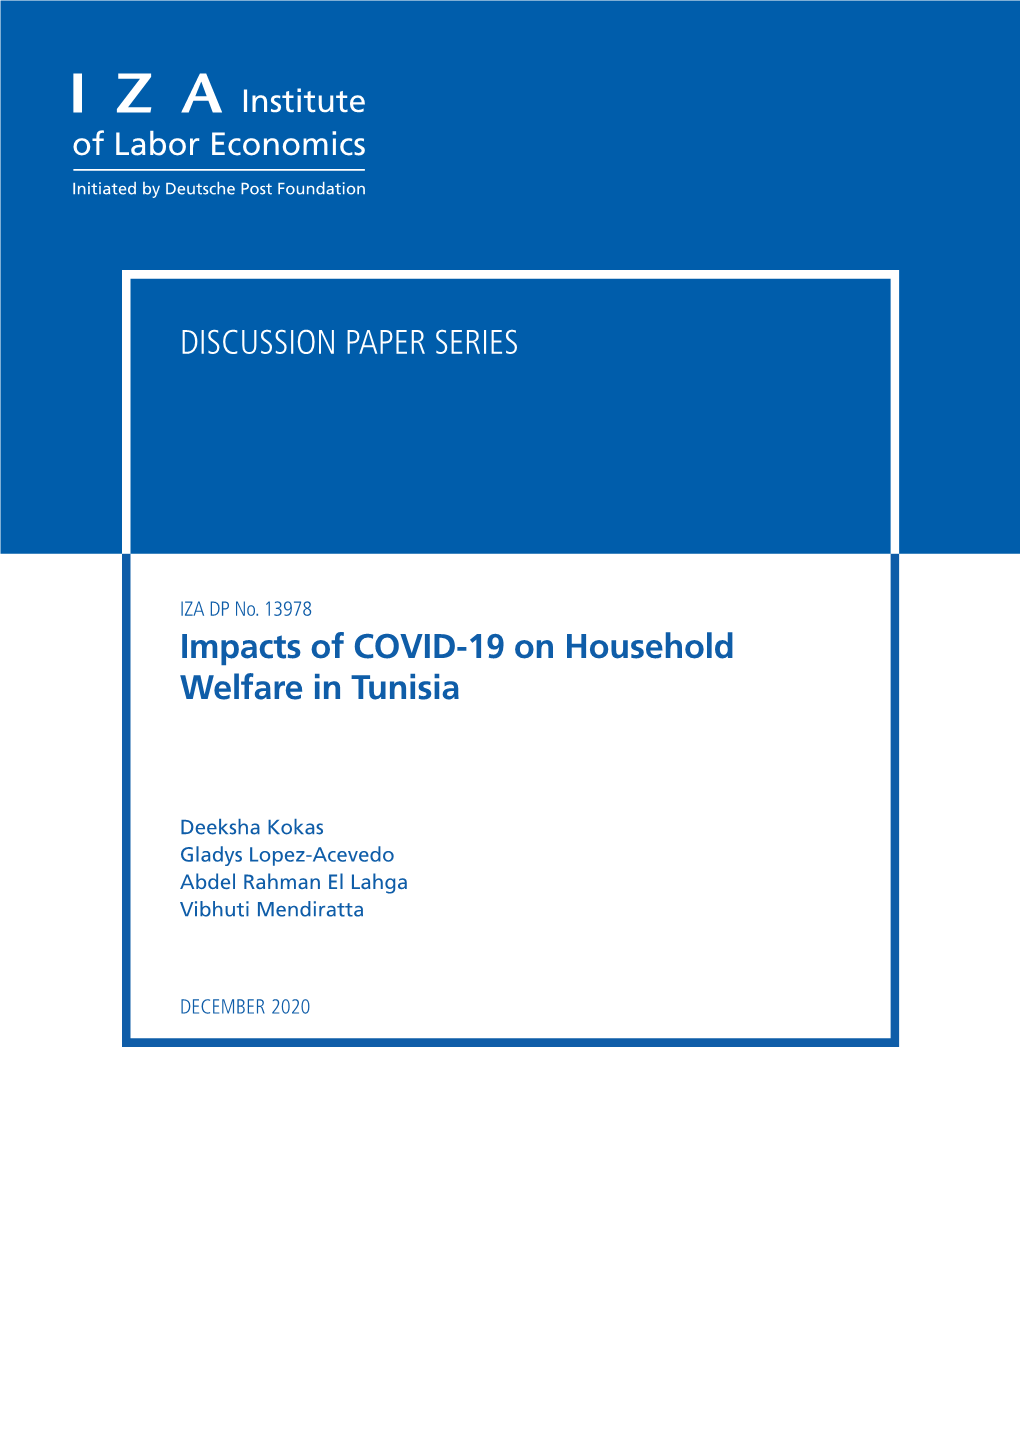 Impacts of COVID-19 on Household Welfare in Tunisia